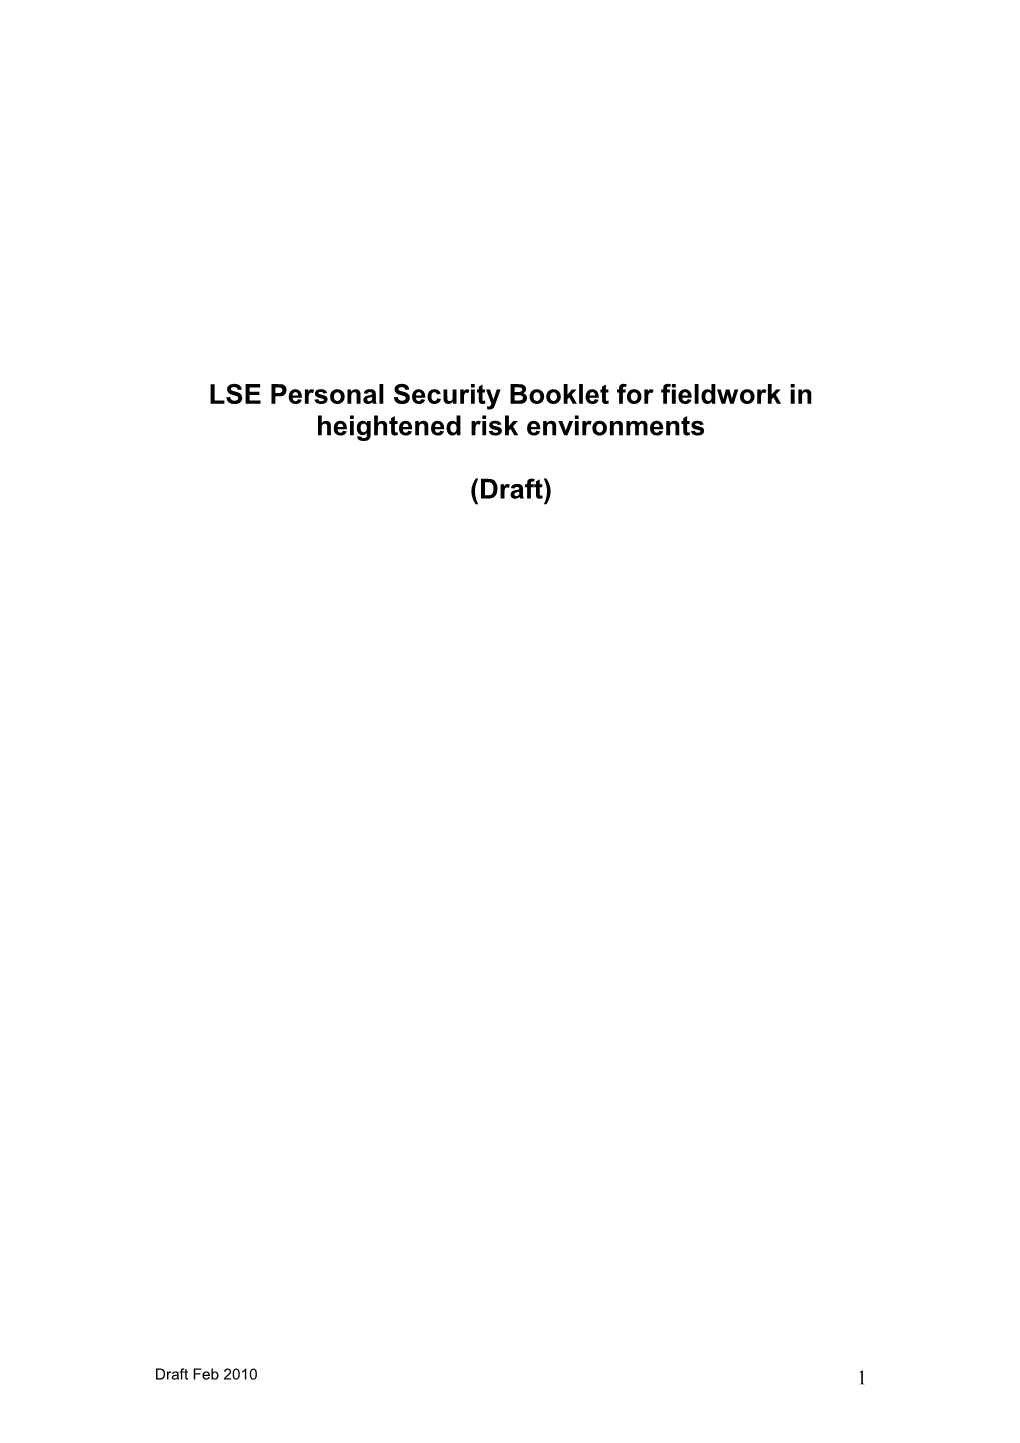 LSE Personal Security Booklet for Fieldwork in Heightened Risk Environments